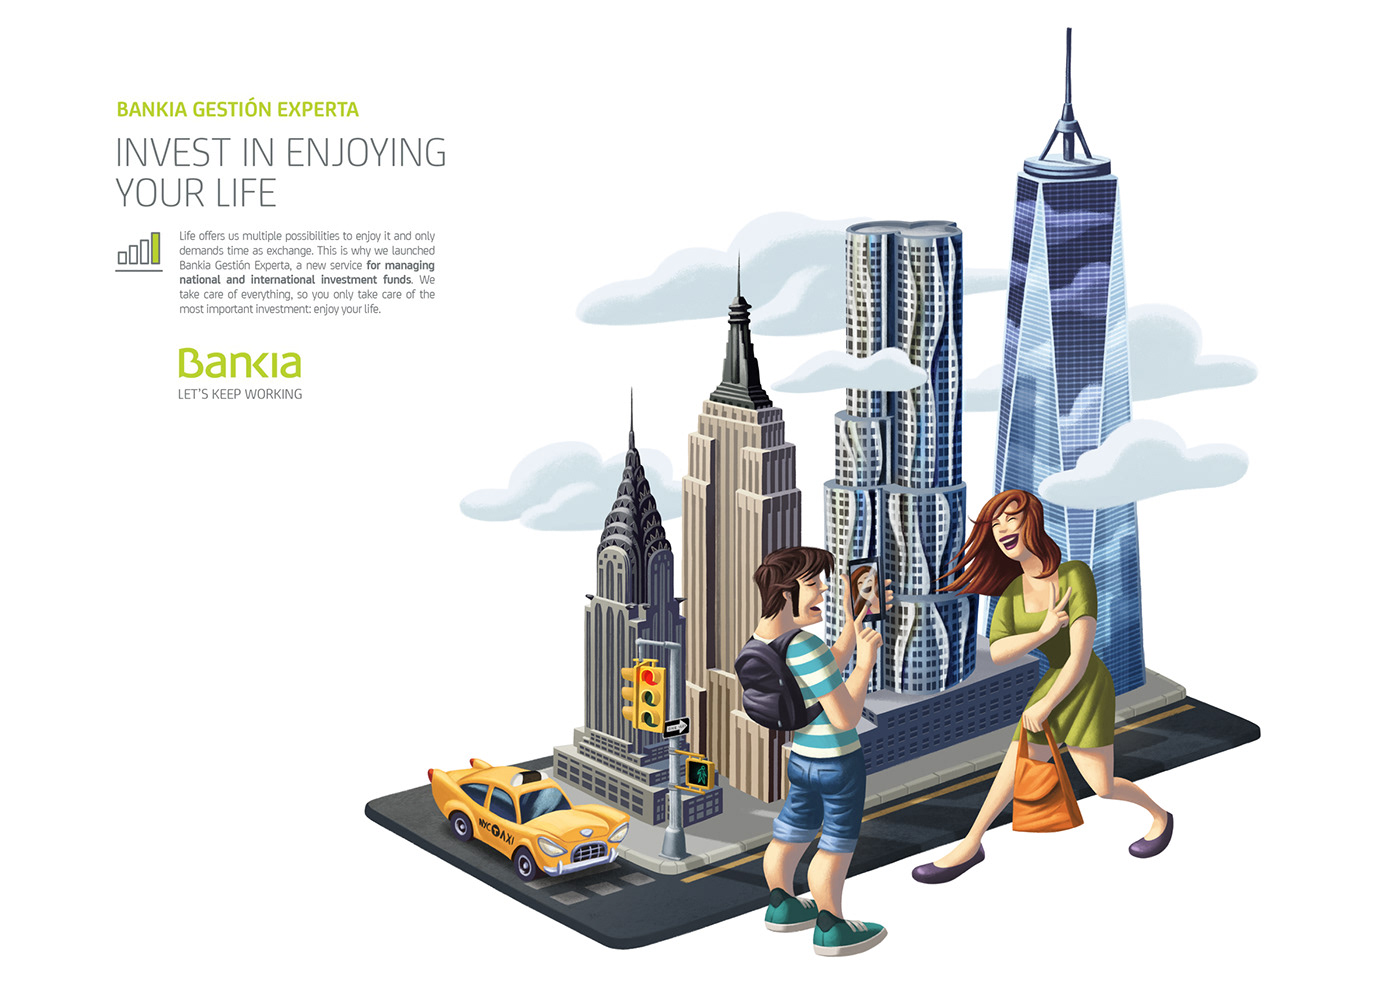 Printed campaign and exterior graphics for Bankia Bank on their new investment funds program
